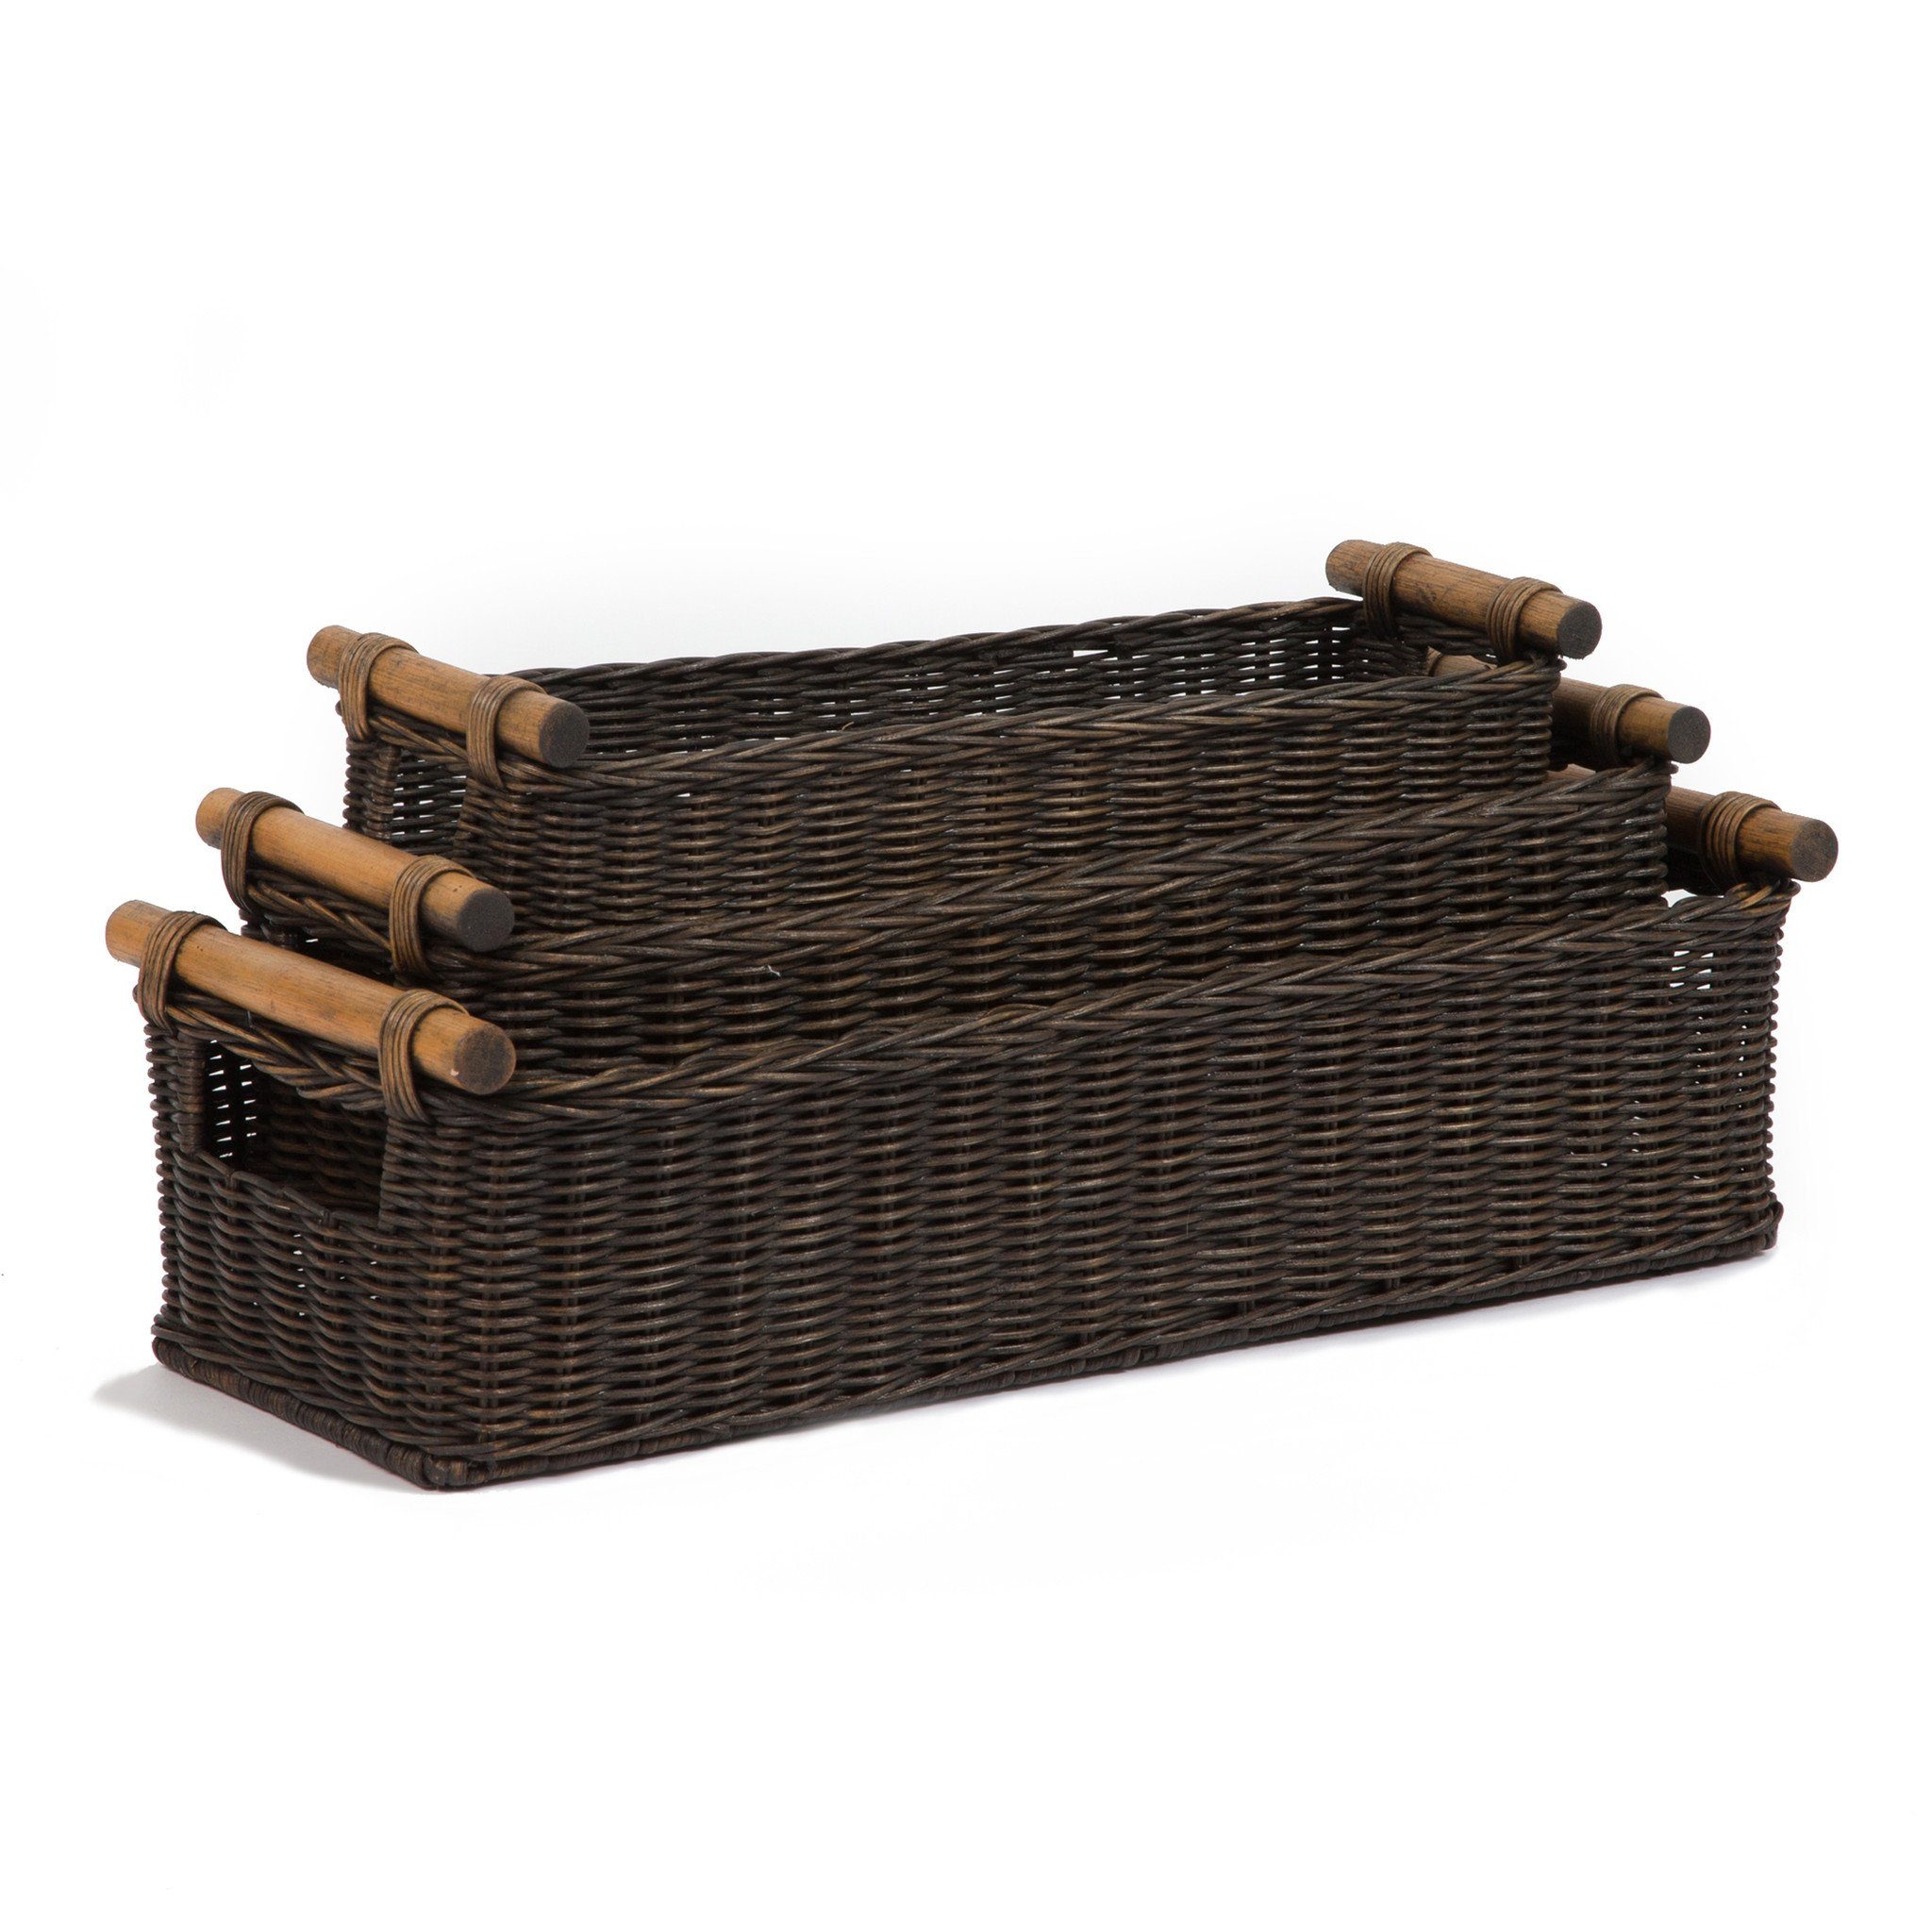 Better Homes & Gardens Small Storage Basket with Handles, Gray and Natural